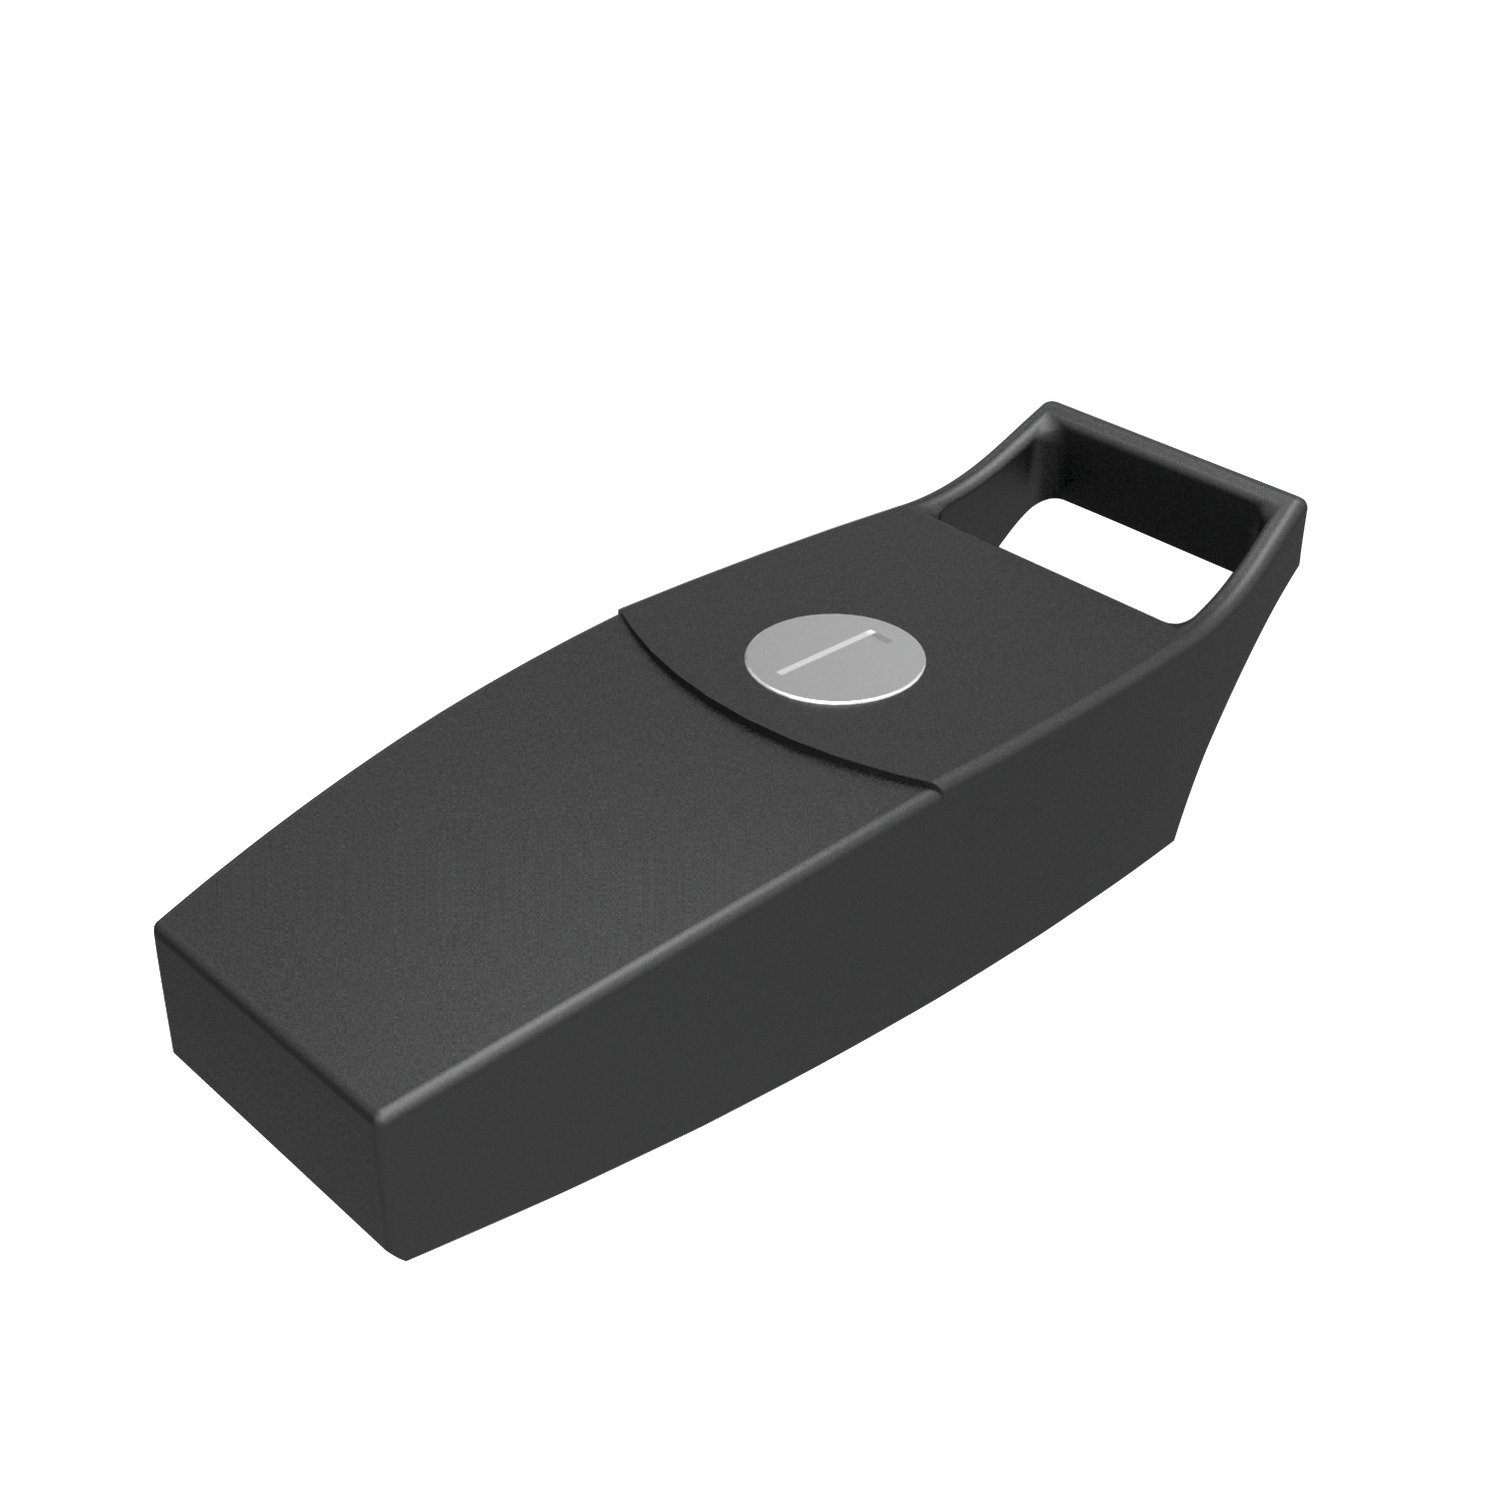 Draw Latches - with Lock Simple Draw Latch - Die cast zinc, black powder coated. Supplied with keys, two per lock.